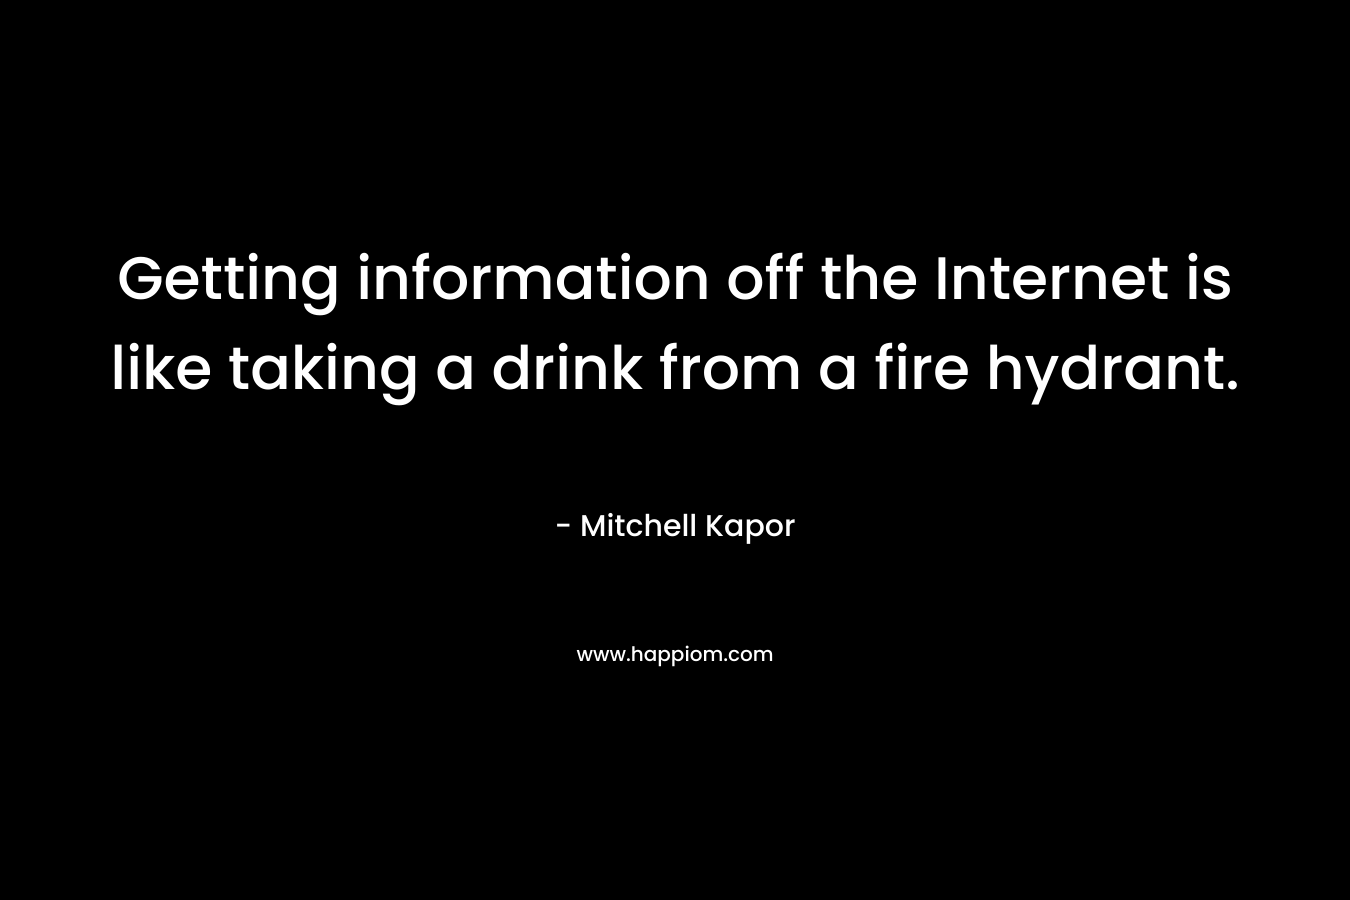 Getting information off the Internet is like taking a drink from a fire hydrant. – Mitchell Kapor